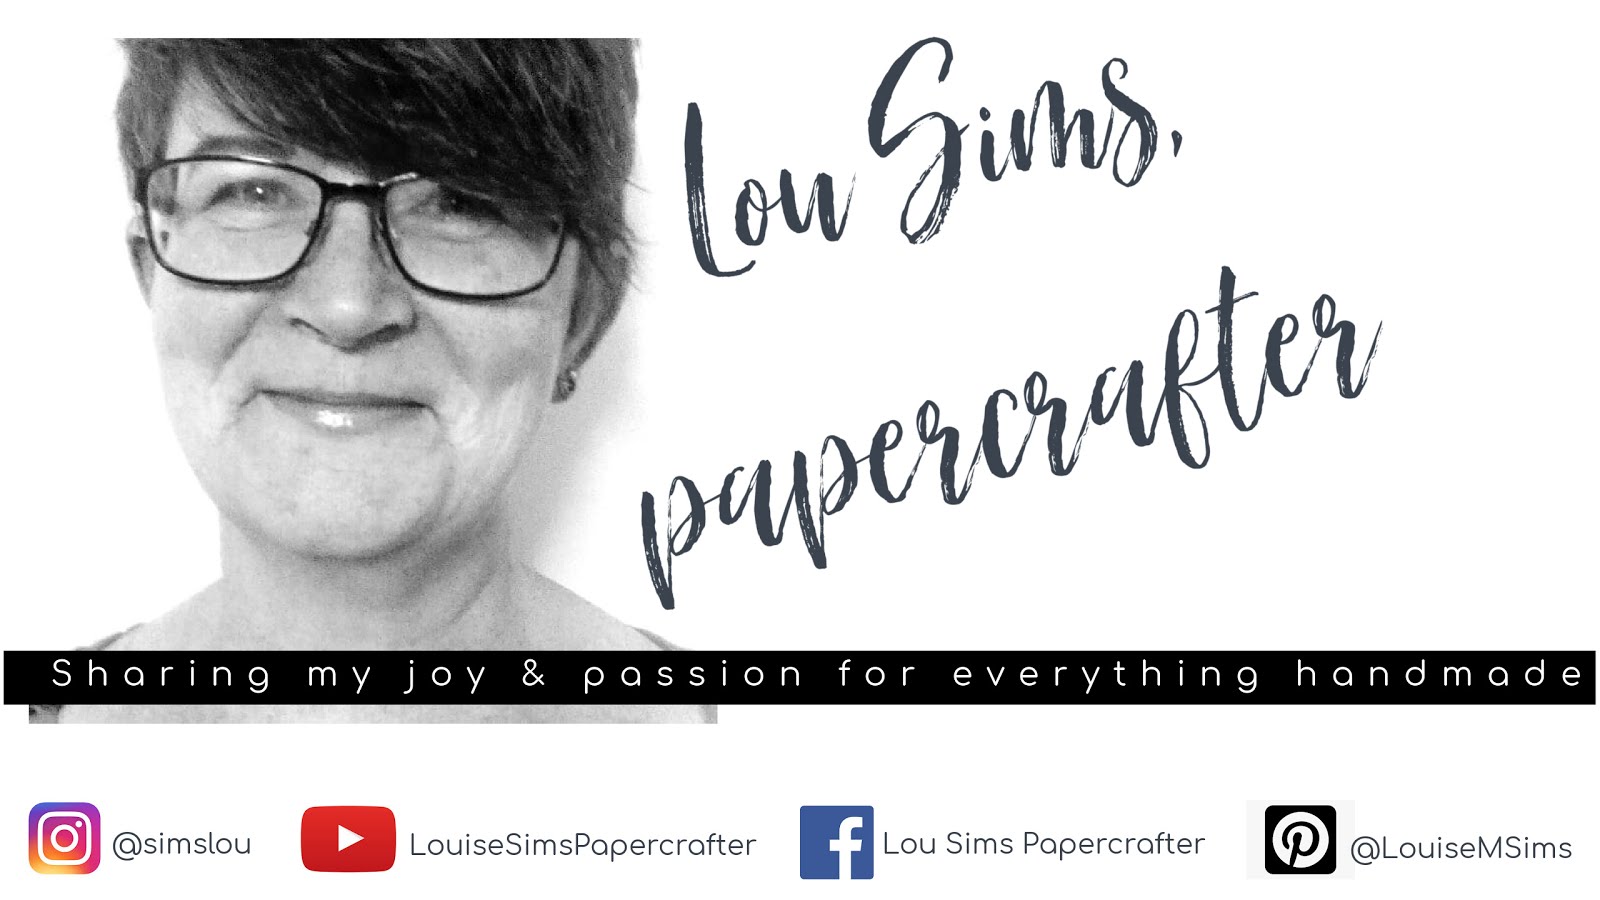 Louise Sims Papercrafter